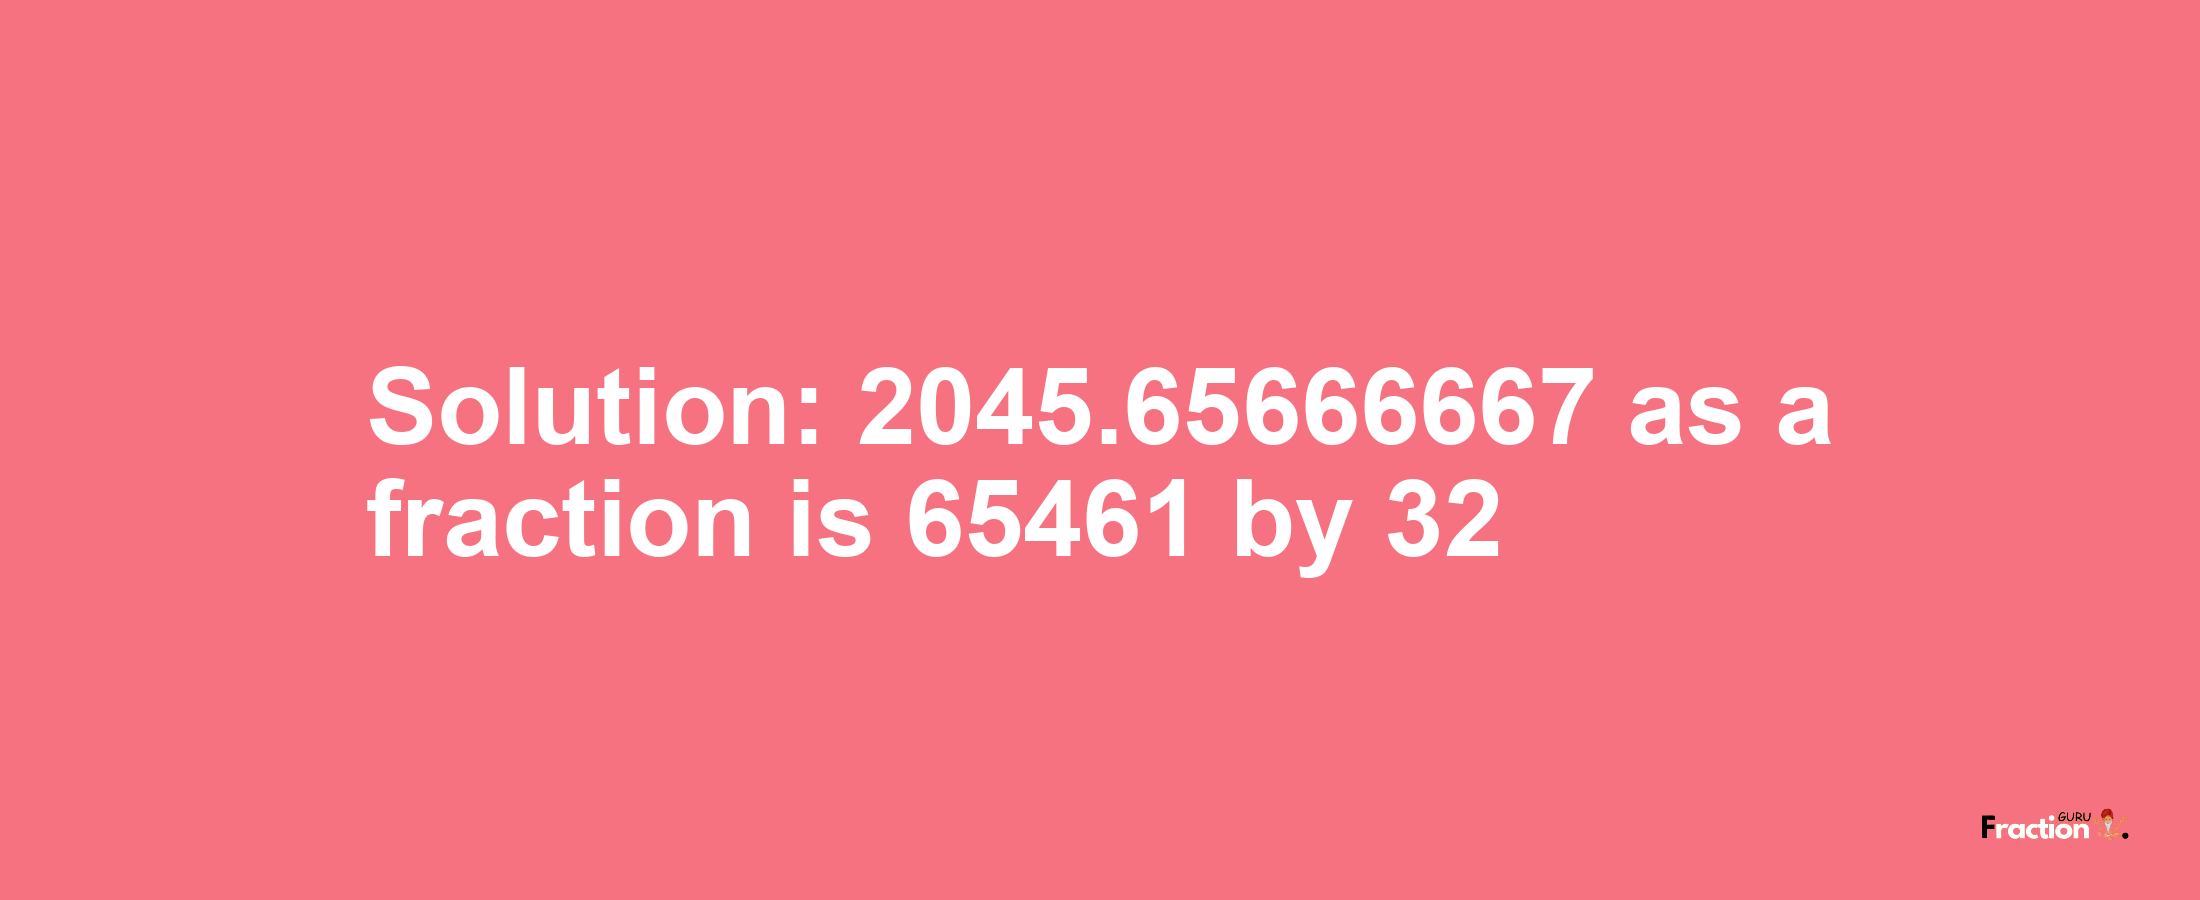 Solution:2045.65666667 as a fraction is 65461/32